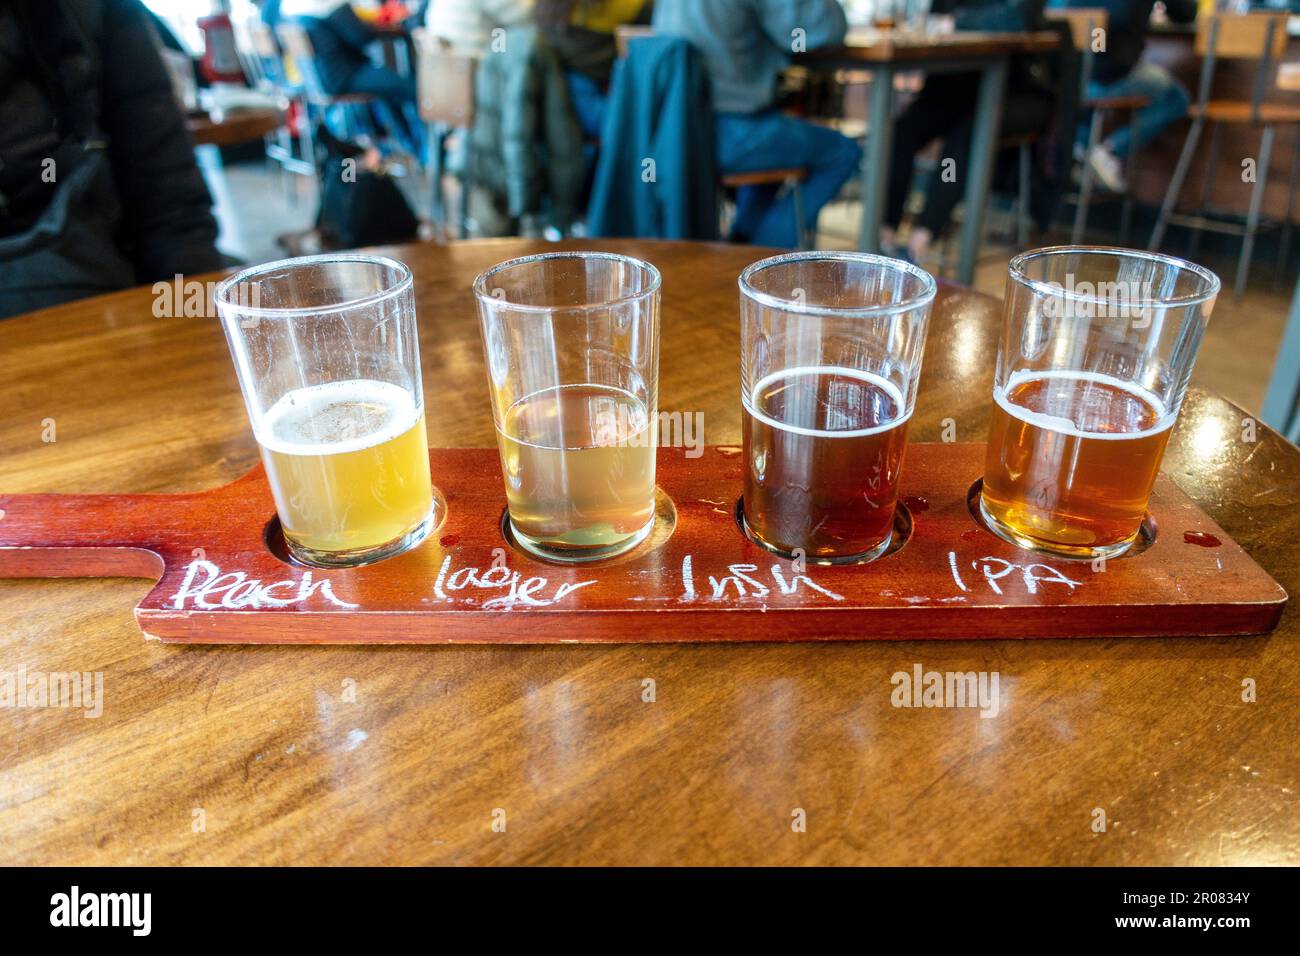 Niagara Brewing Company Flight Of Beer Inside Their Brew Pub Niagara Falls Ontario Canada Four Different Beers To Sample. Stock Photo